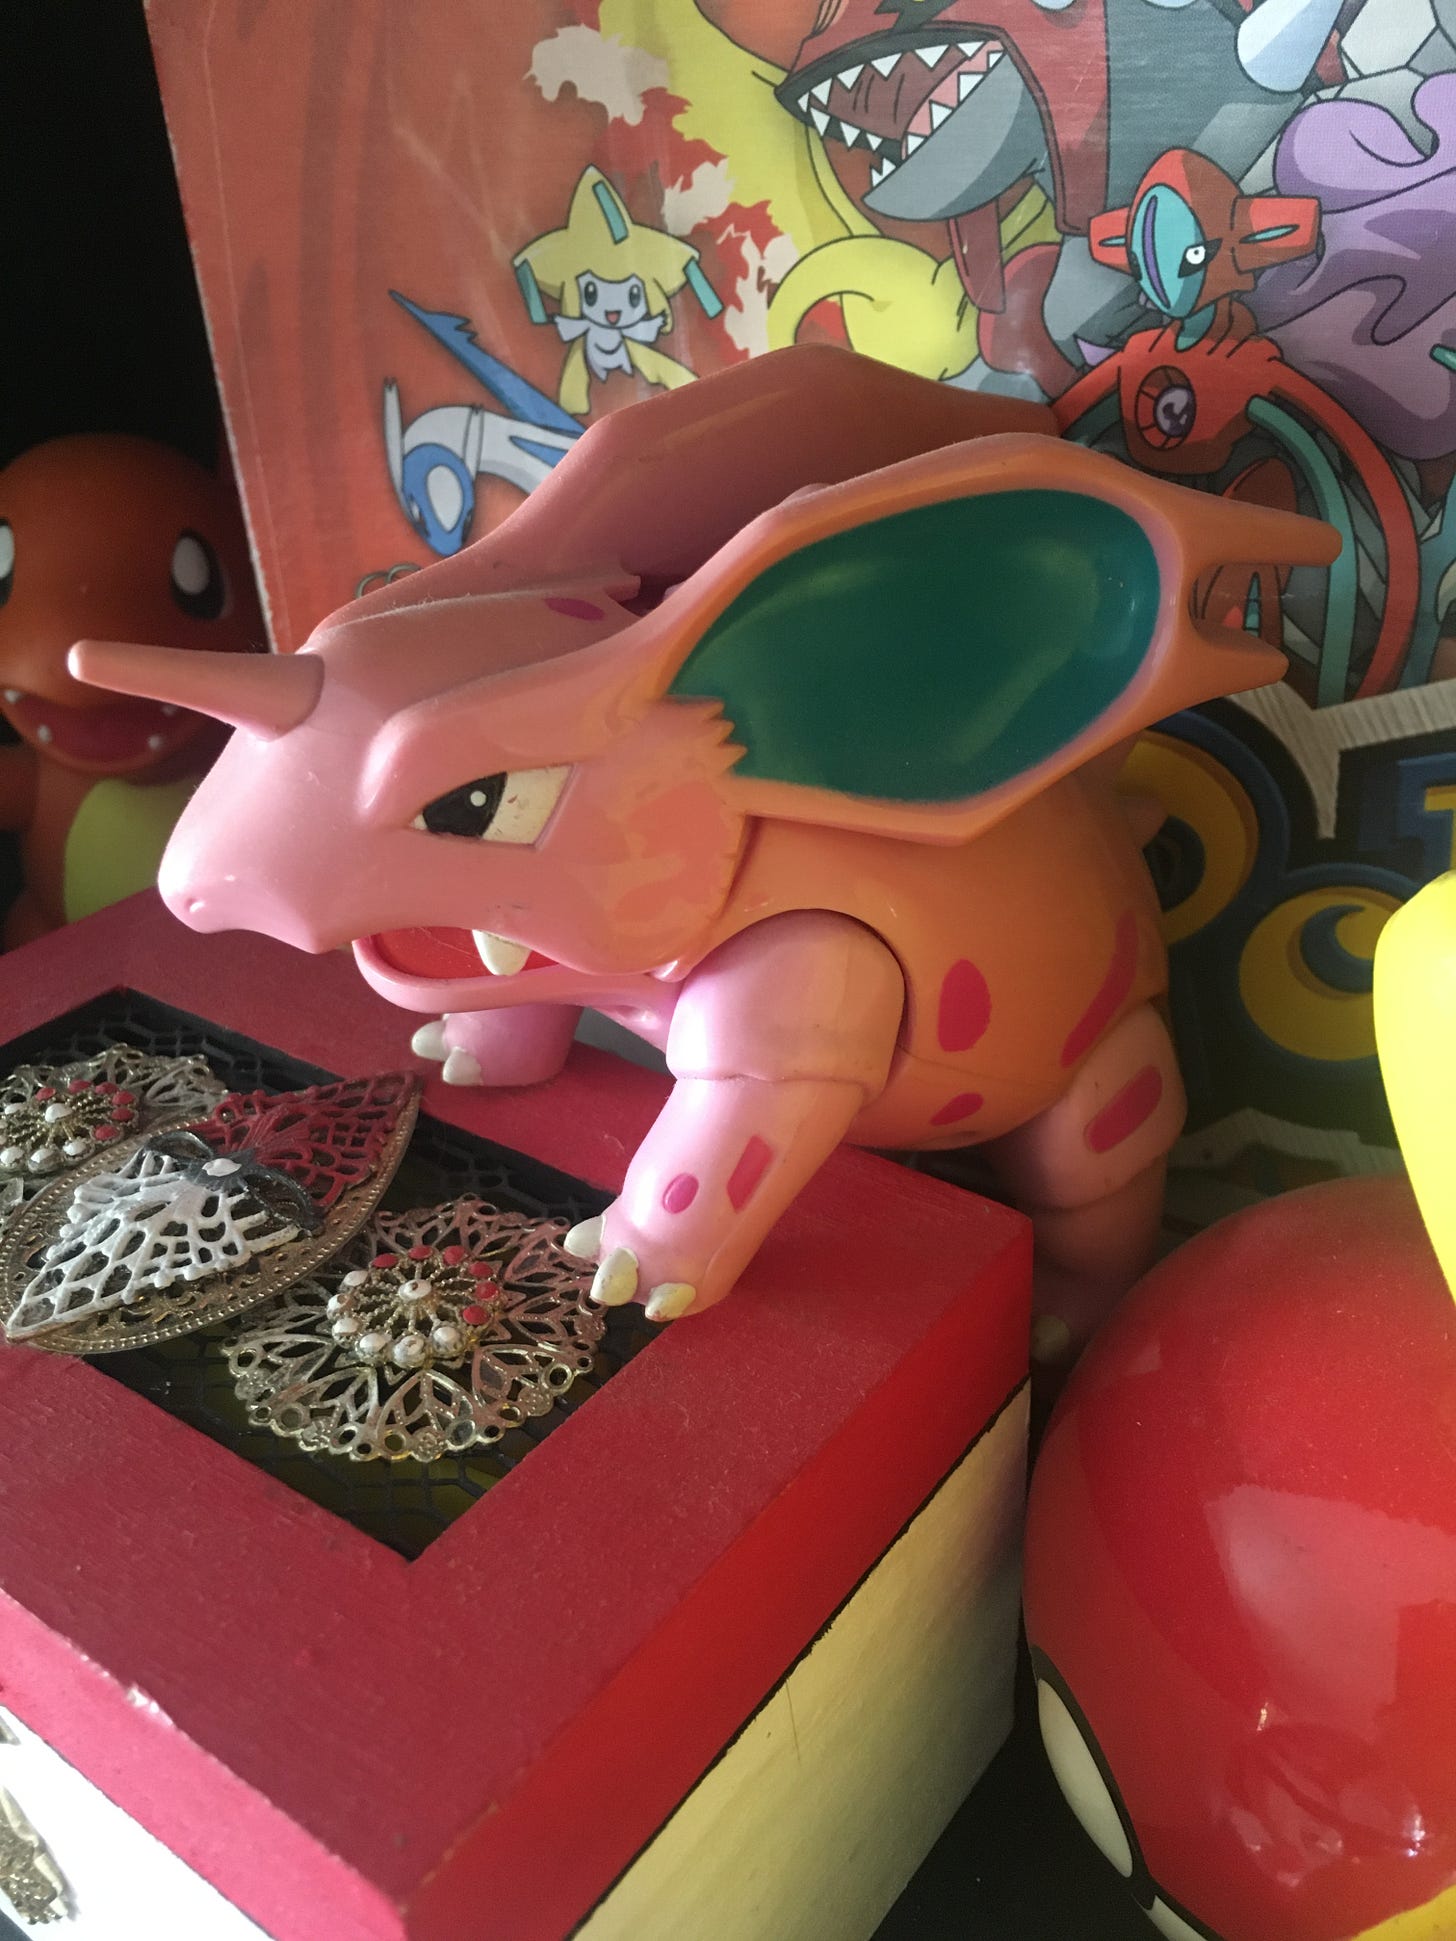 Jolty's Nidorino figure, which he has had since he was eleven years old